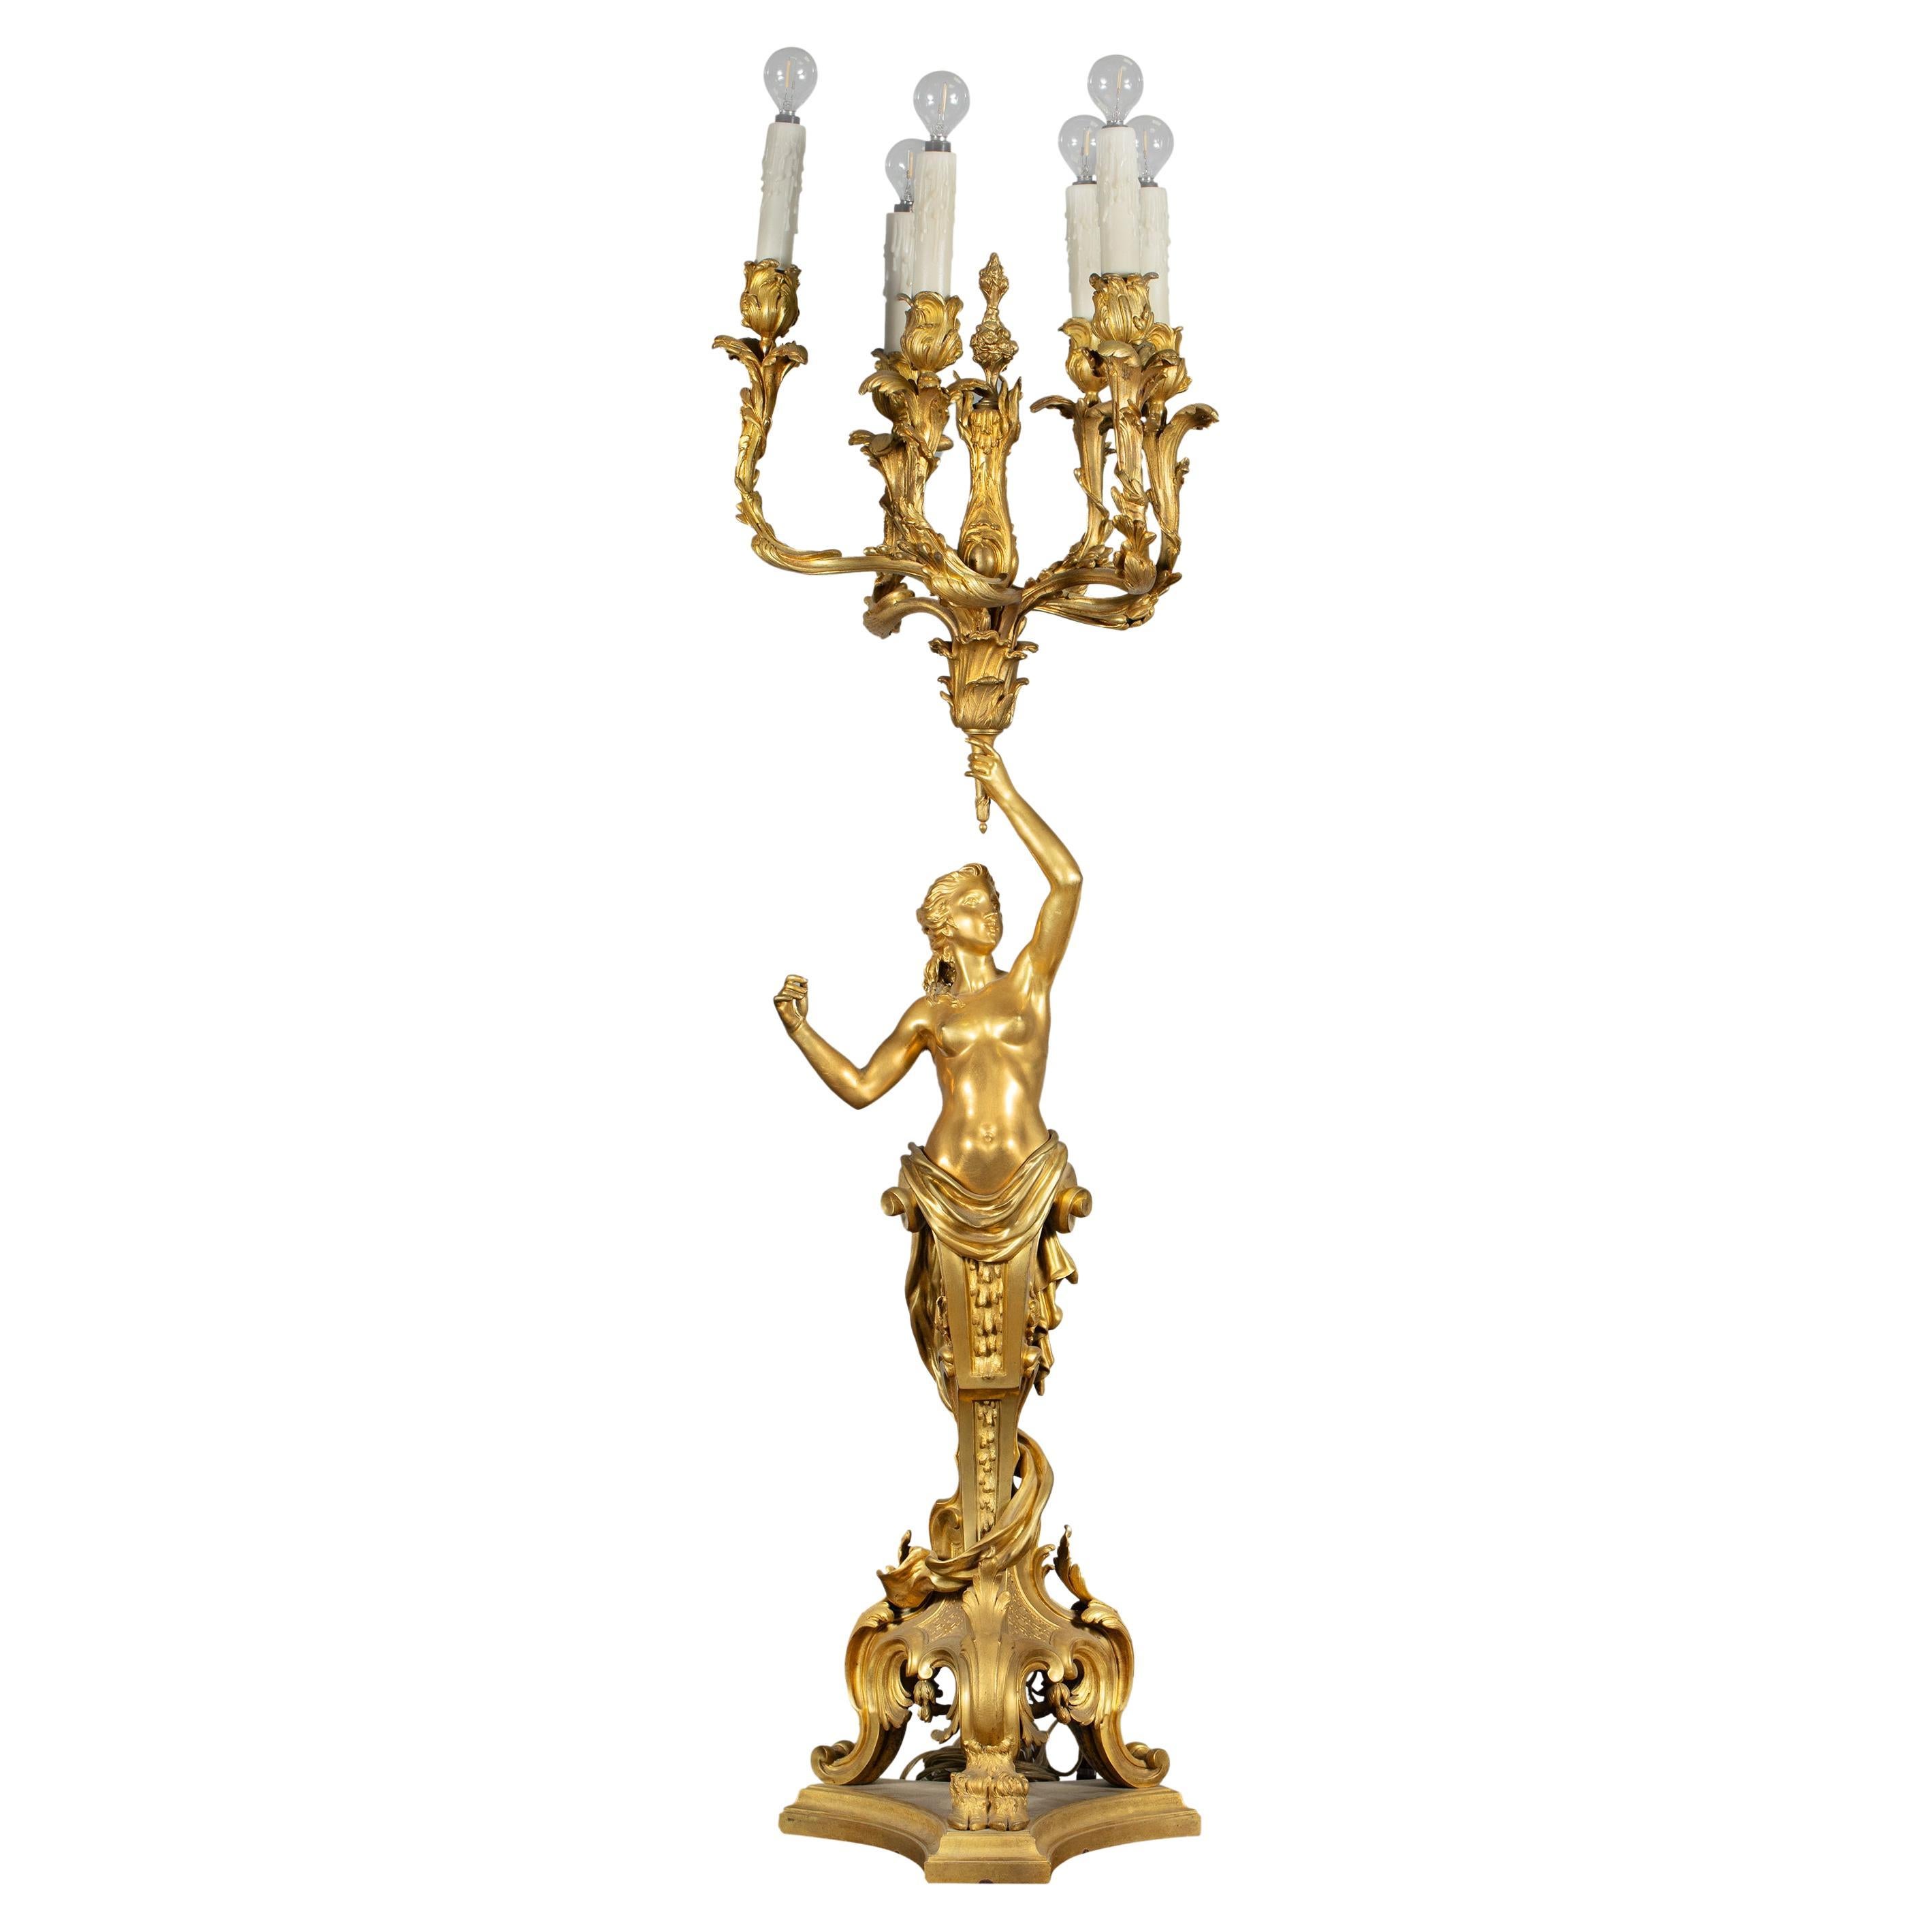 A Large French Gilt-Bronze Centerpiece Candelabra After Clodion, 19th Century For Sale